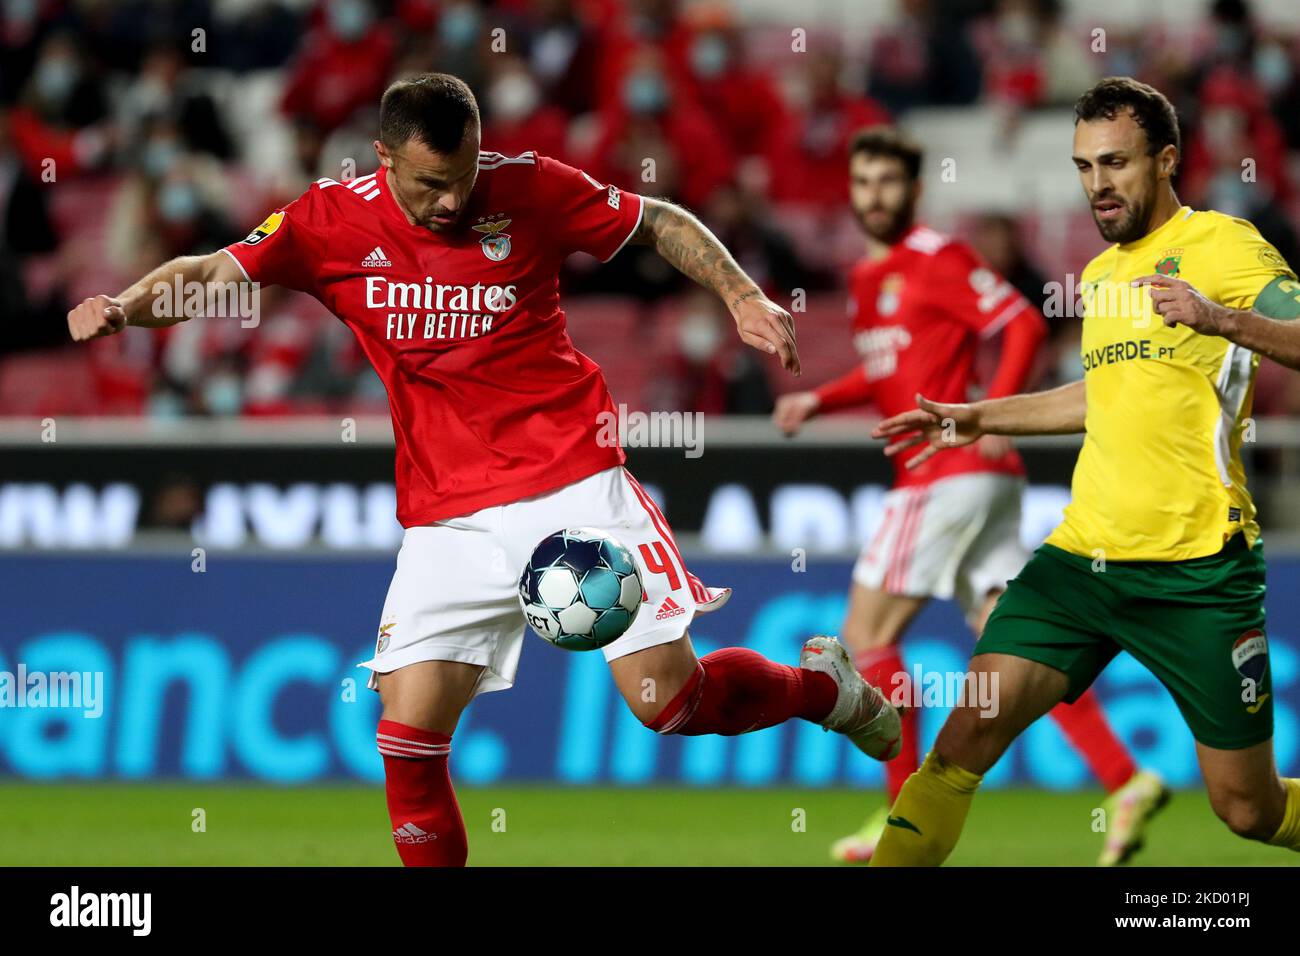 Haris Seferovic of SL Benfica(L) vies with Marco Baixinho of FC Pacos Ferreira during the Portuguese League football match between SL Benfica and FC Pacos Ferreira at the Luz stadium in Lisbon, Portugal on January 9, 2022. (Photo by Pedro FiÃºza/NurPhoto) Stock Photo